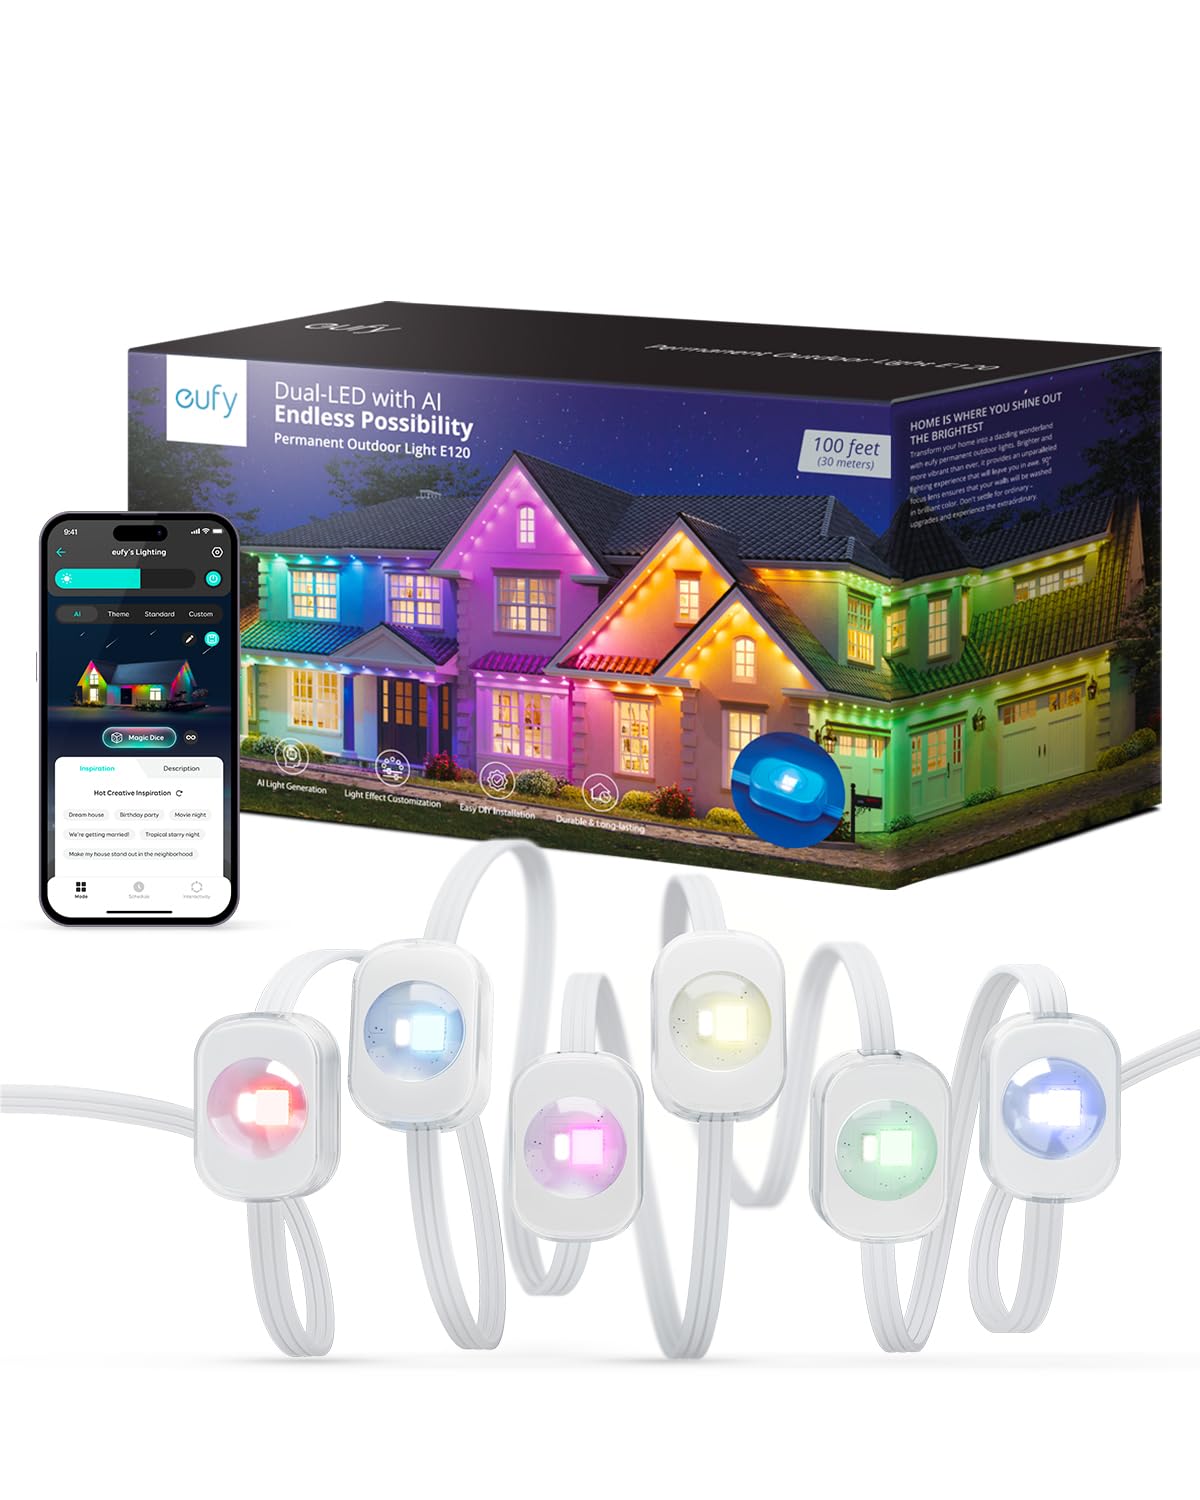 eufy 100' Permanent Outdoor Smart String Lights (E120) $200 + Free Shipping